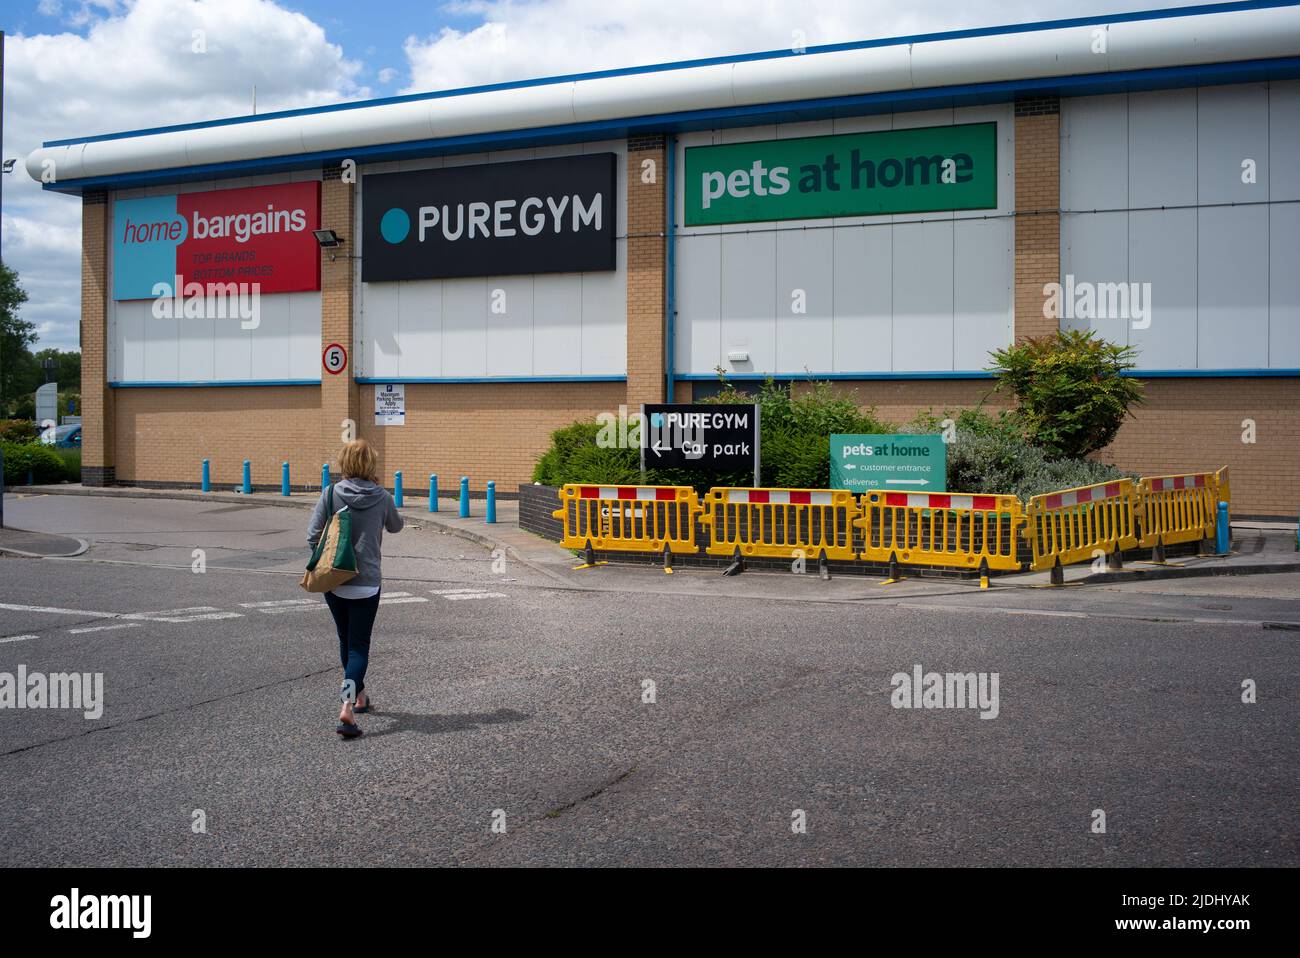 https://c8.alamy.com/comp/2JDHYAK/a-women-walks-towards-an-out-of-town-retail-unit-site-in-salisbury-wiltshire-uk-signage-with-home-bargains-pure-gym-and-pets-at-home-showing-2JDHYAK.jpg